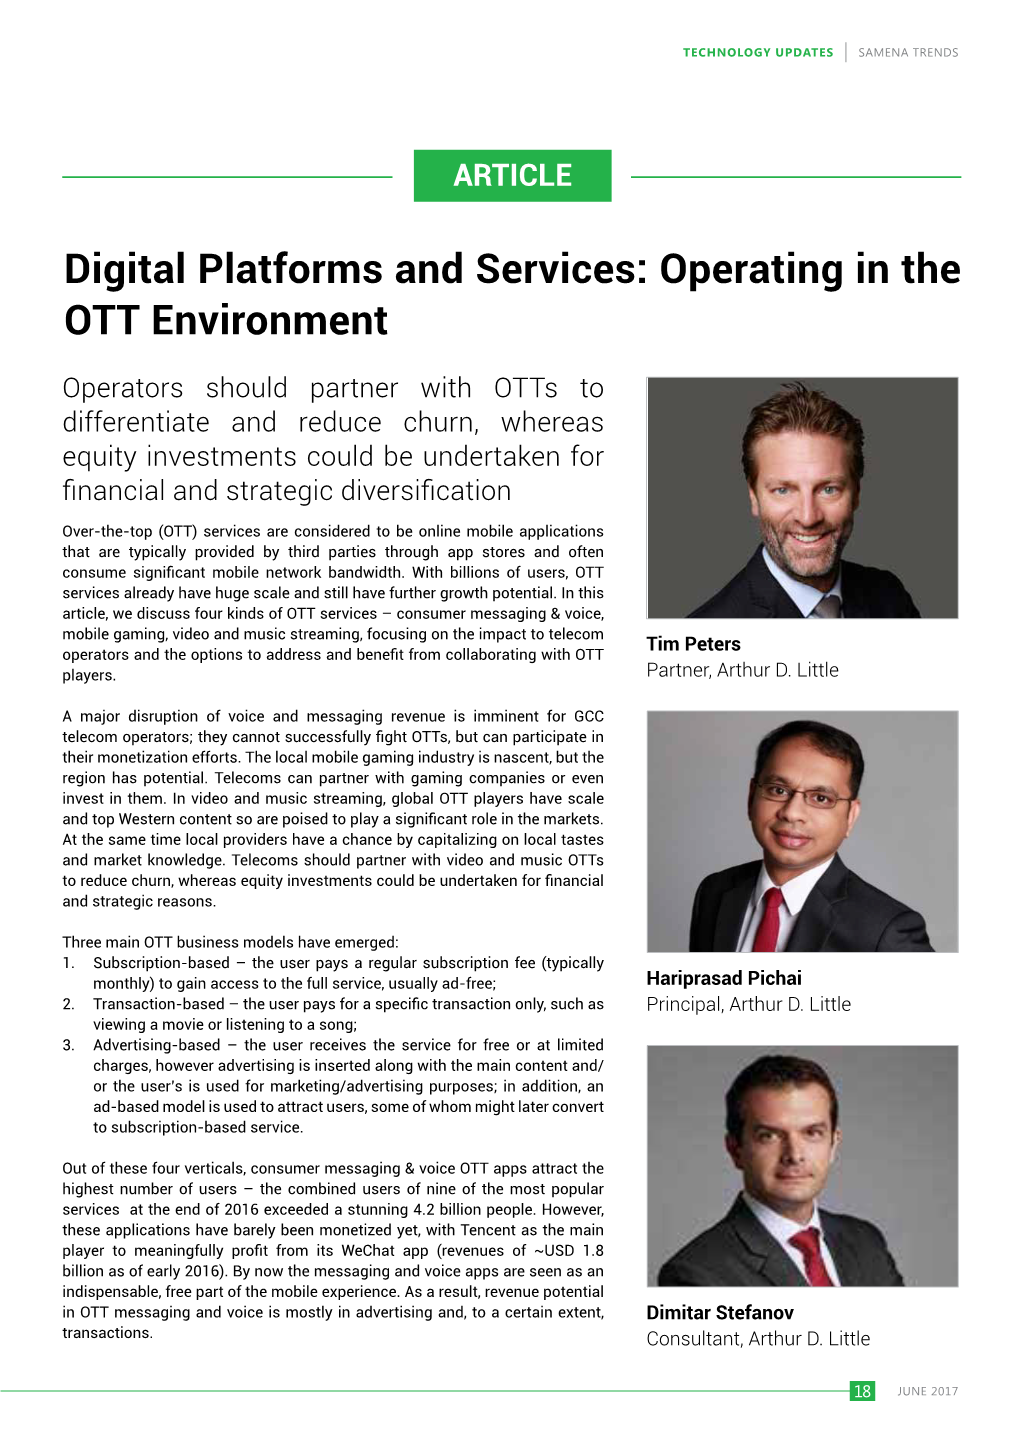 Digital Platforms and Services: Operating in the OTT Environment